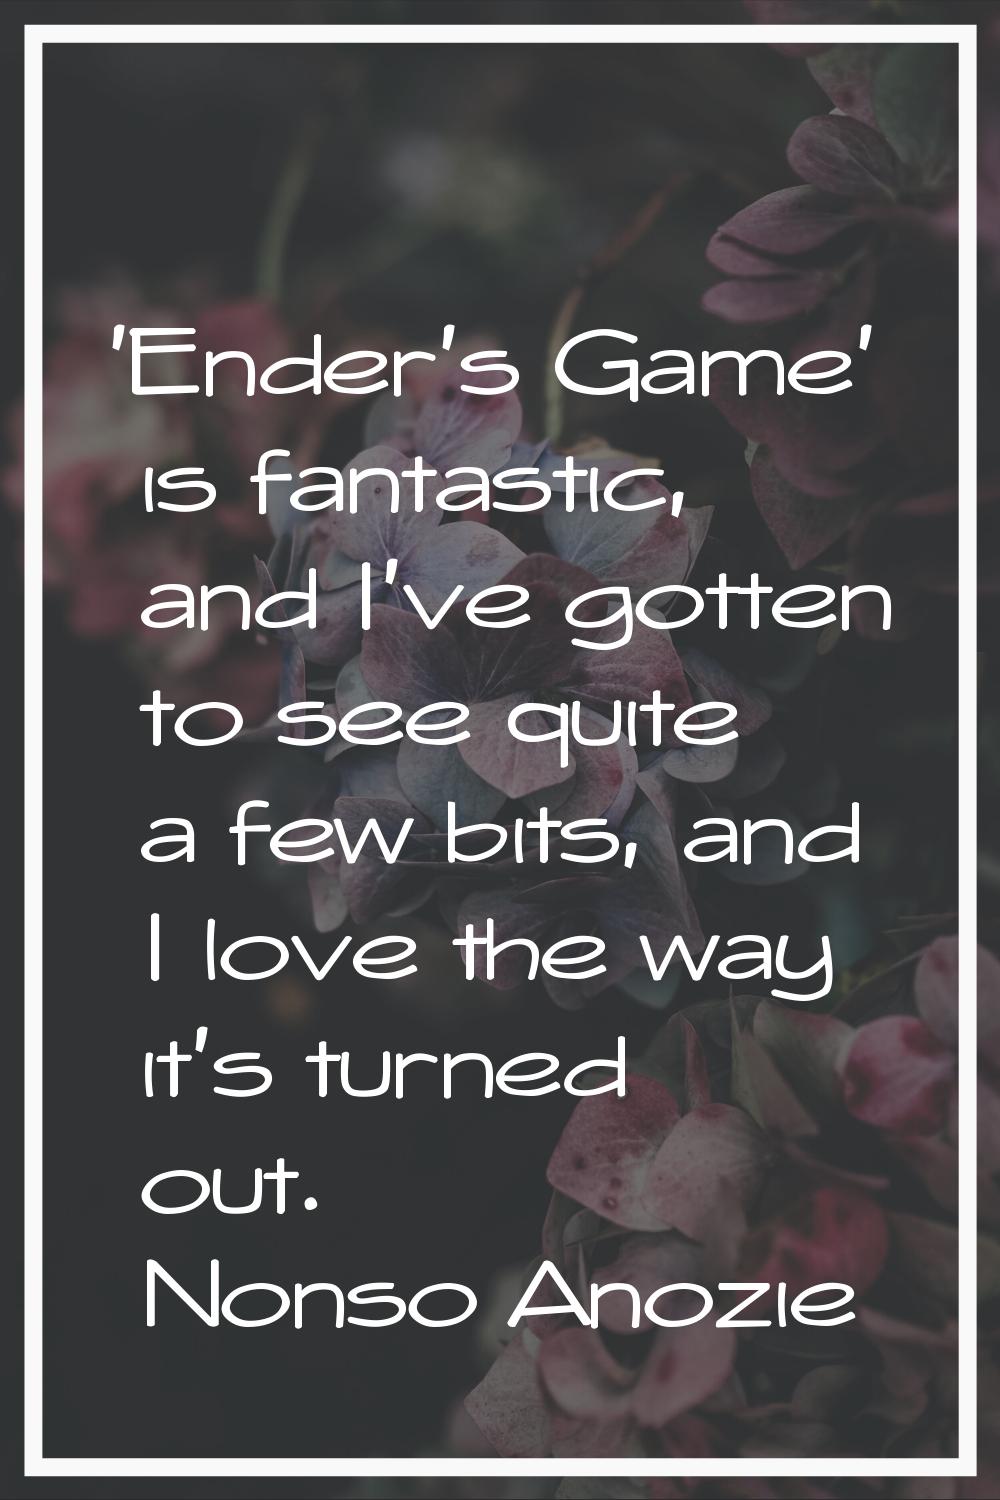 'Ender's Game' is fantastic, and I've gotten to see quite a few bits, and I love the way it's turne